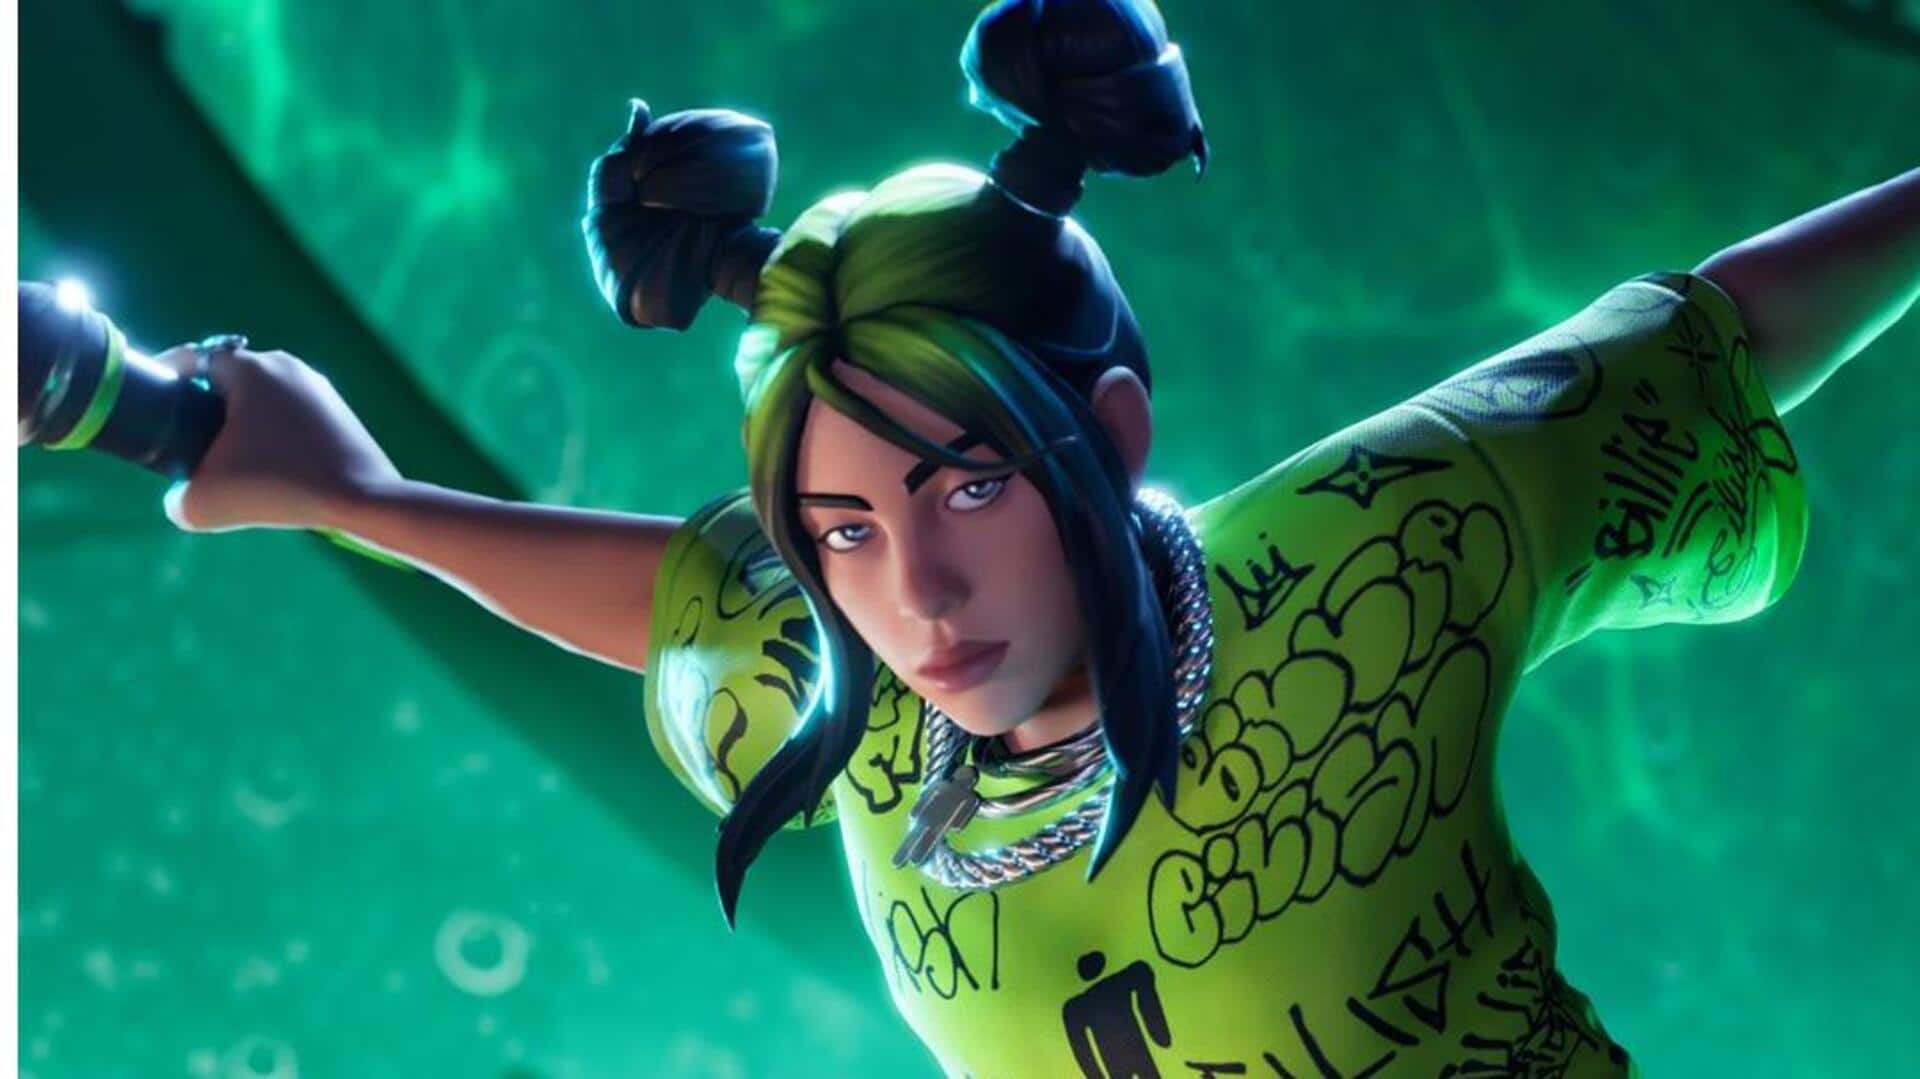 Play as Billie Eilish on Fortnite Festival from today